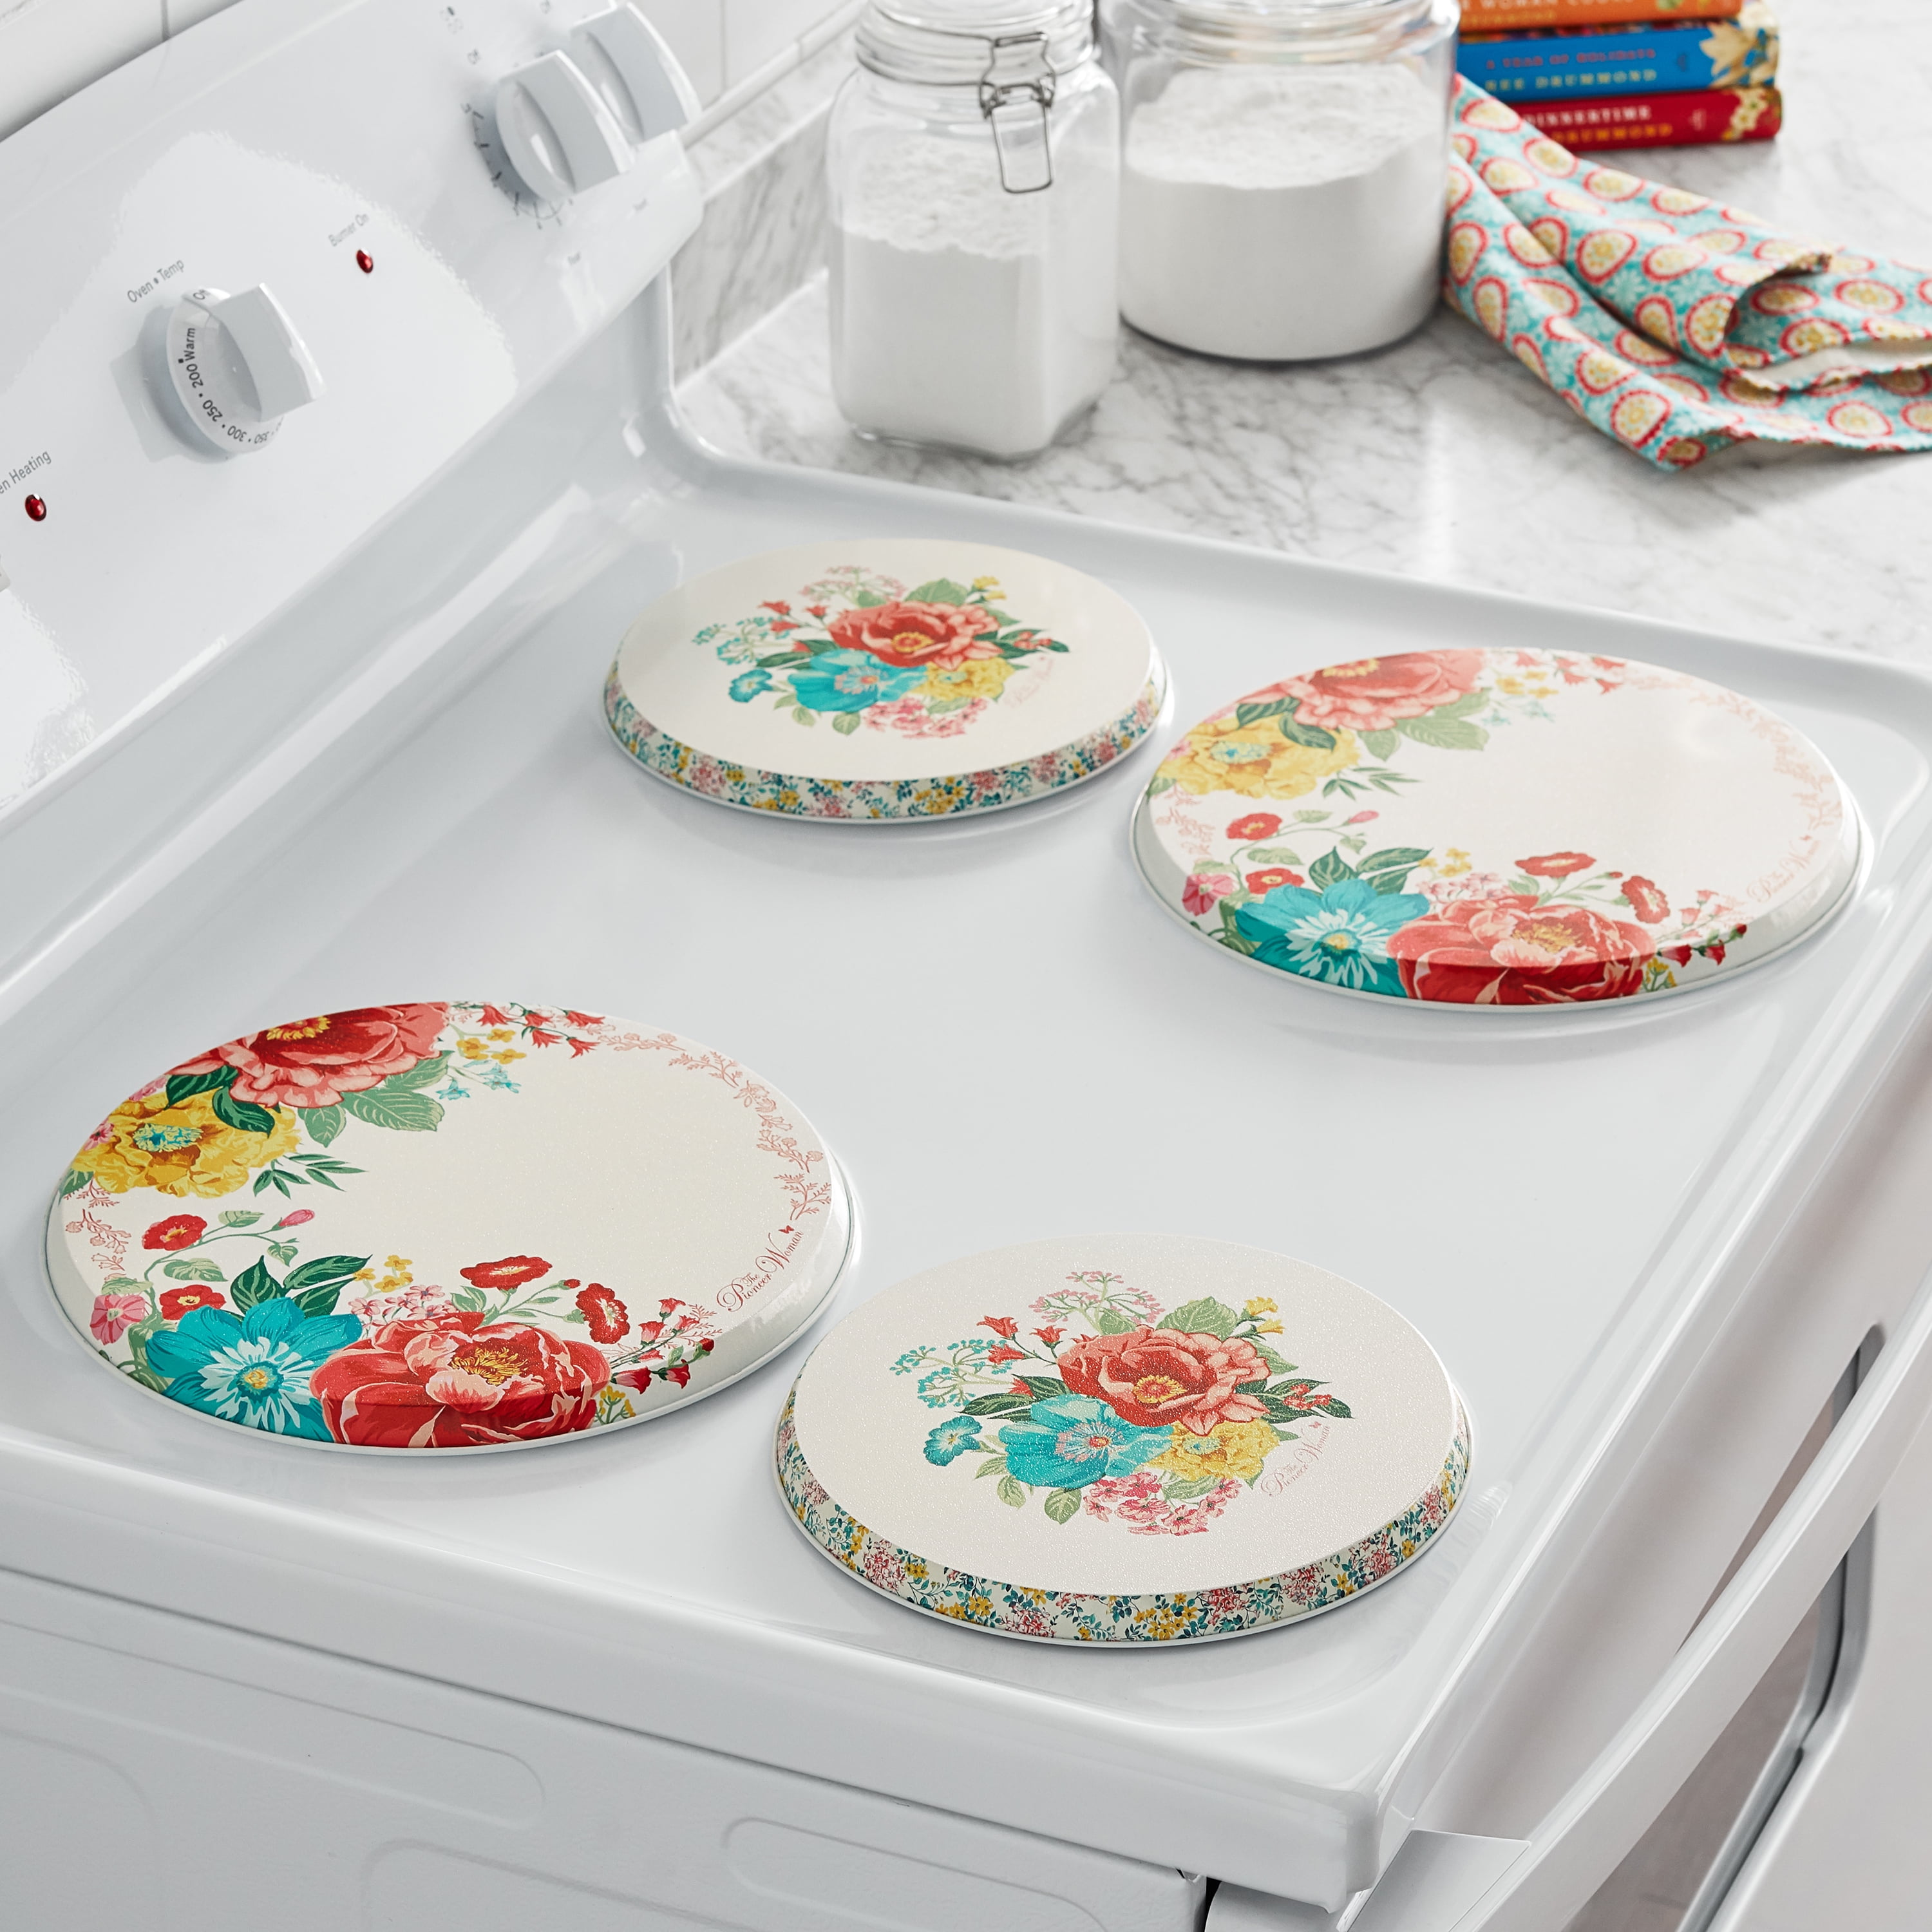 The Pioneer Woman Blooming Bouquet Stove Burner Covers, 4 Count